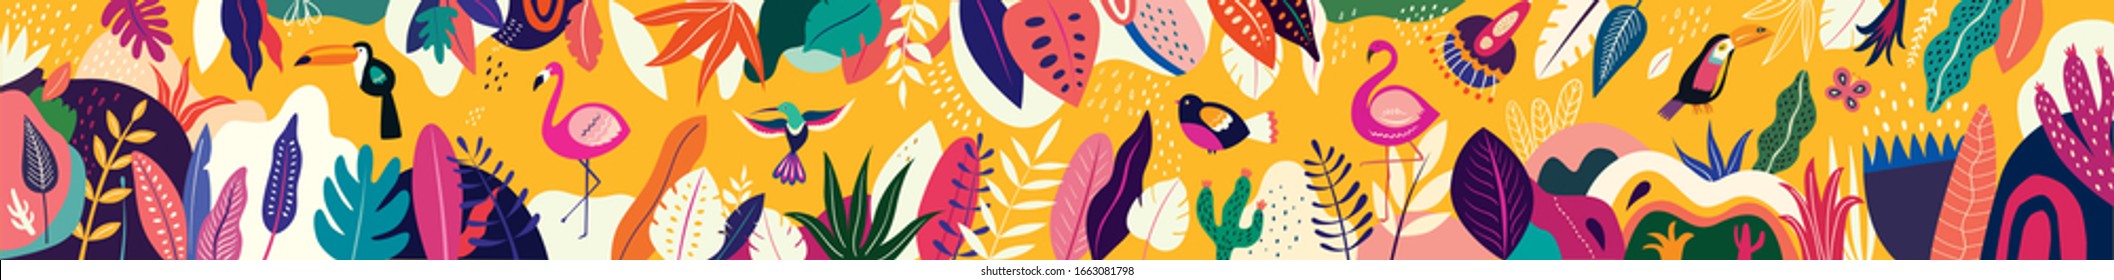 Animals big collection. Animals of Brazil. Vector colorful set of illustrations with tropical flowers, leaves, monkey, flamingo, and birds. Brazil tropical pattern. Rio de janeiro pattern - Shutterstock ID 1663081798